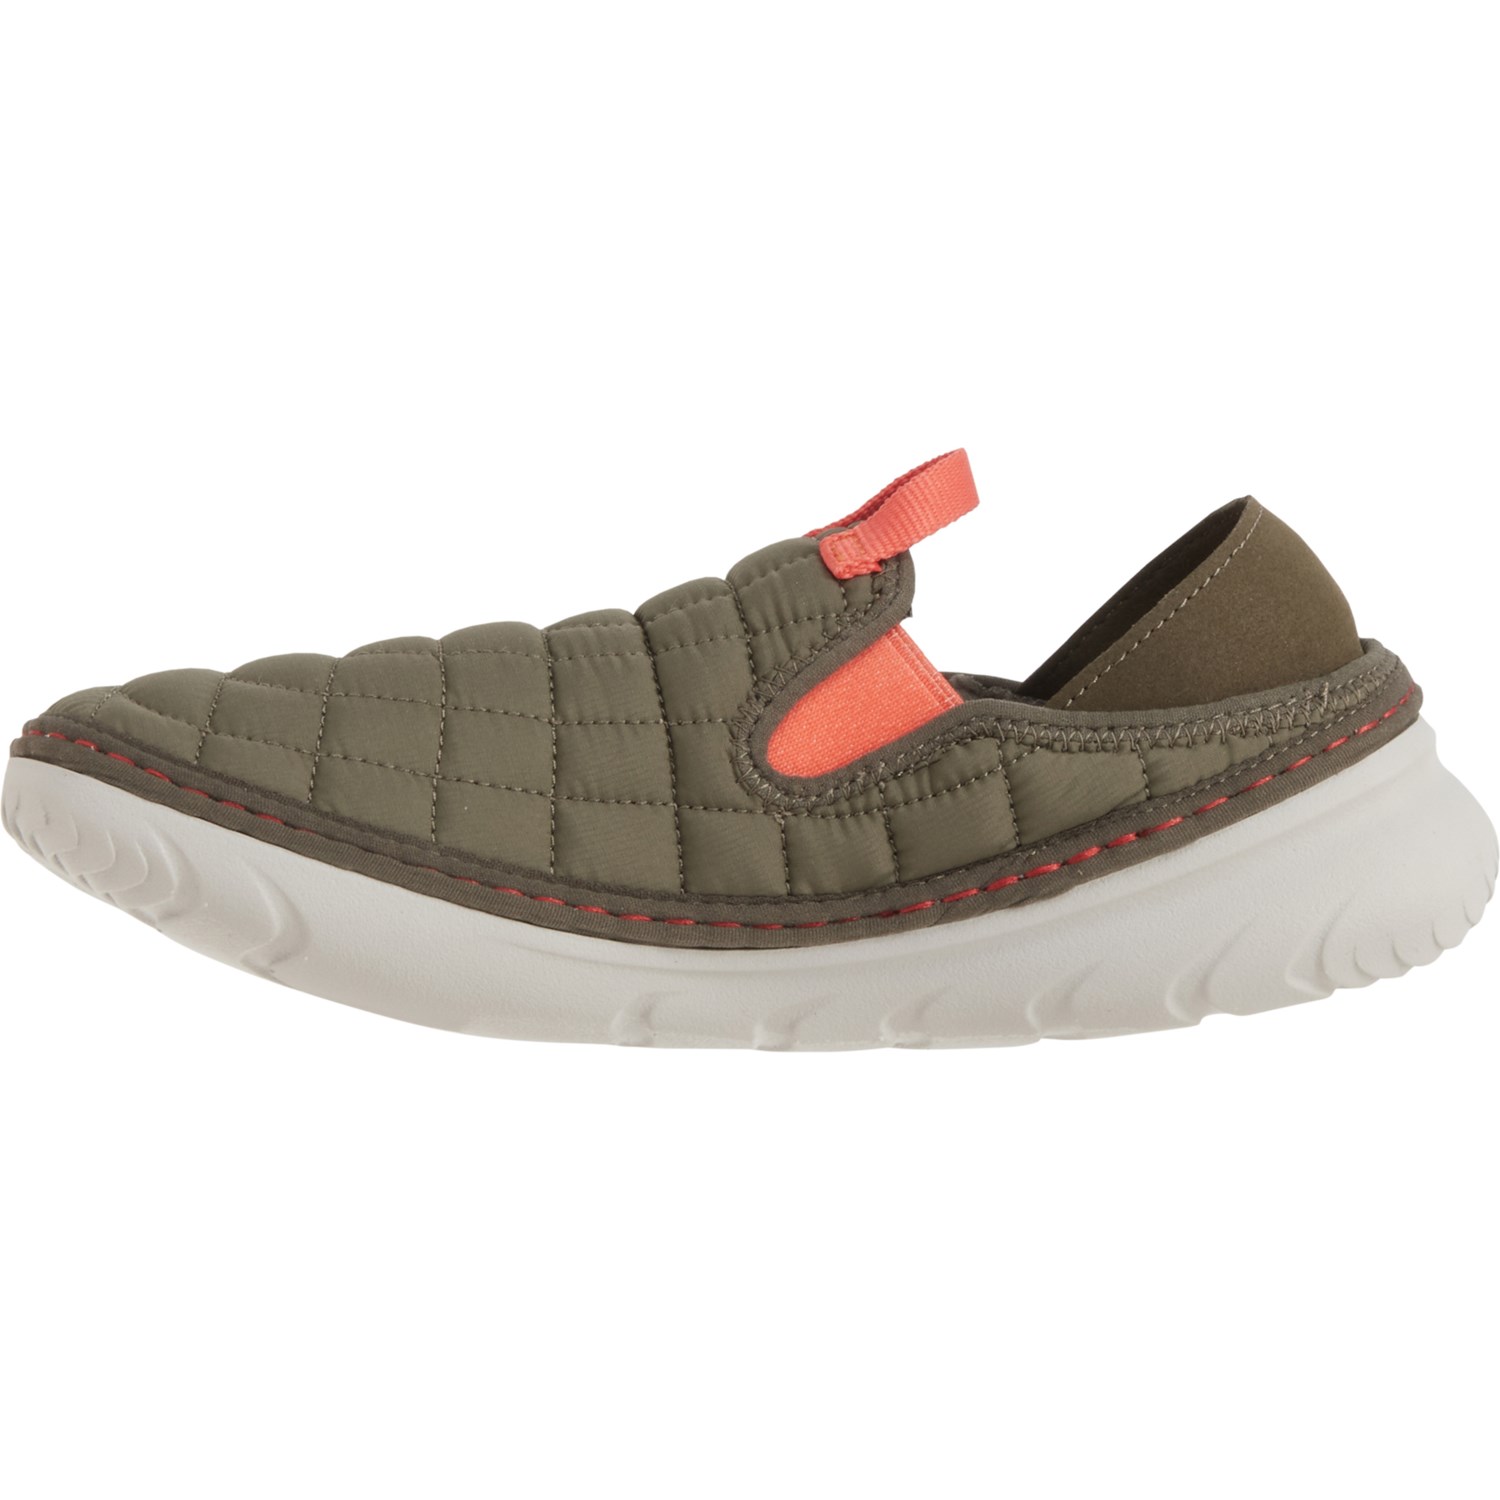 Merrell Hut Moc Shoes (For Women) - Save 48%